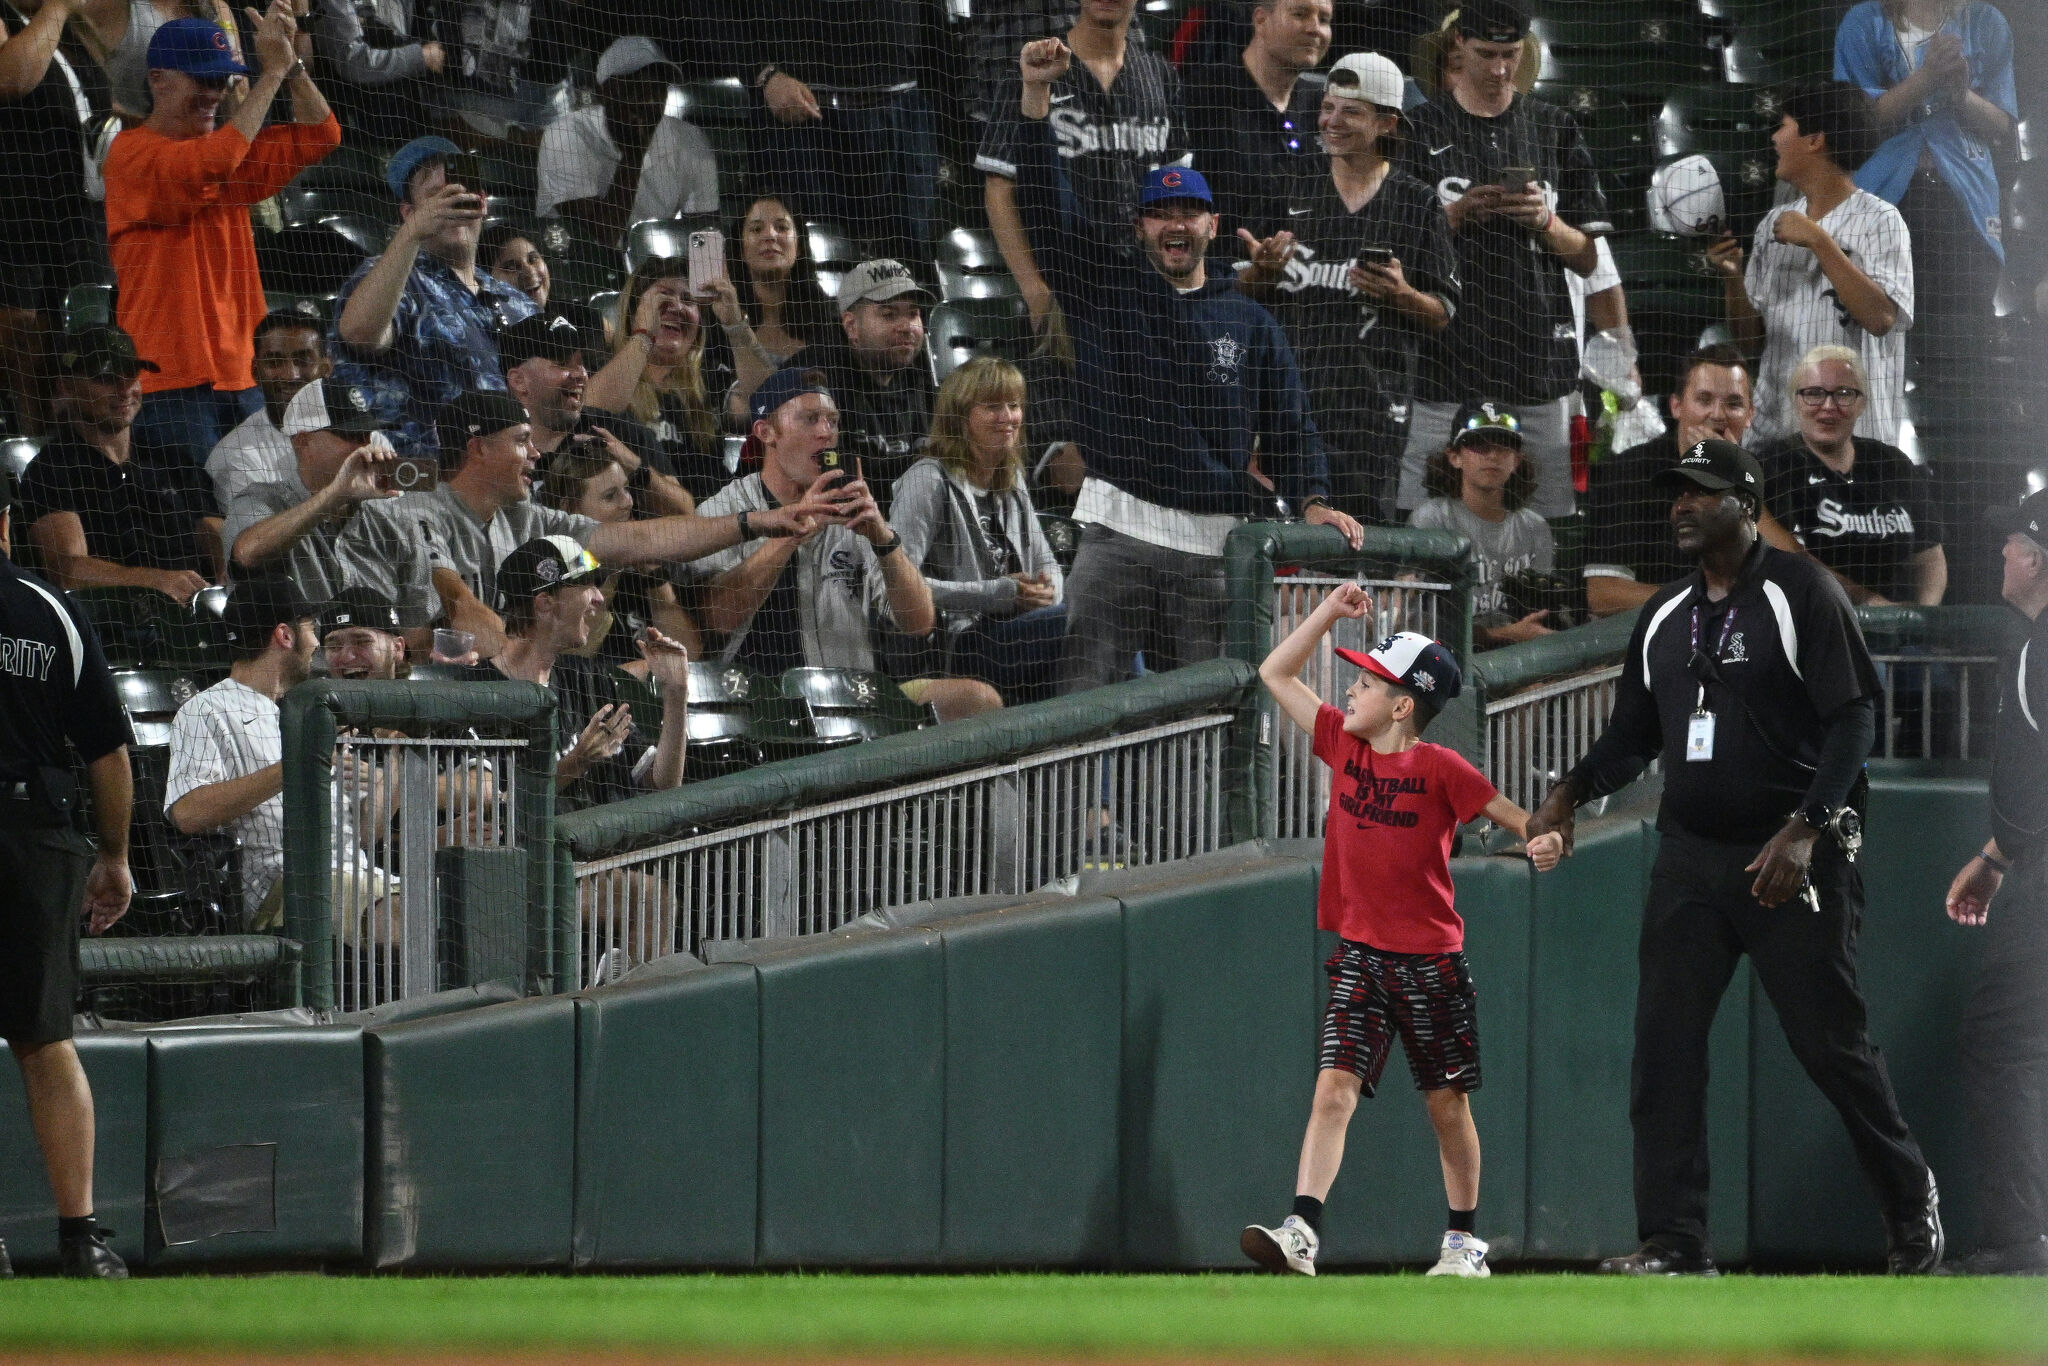 White Sox fan has attended 588 straight home games